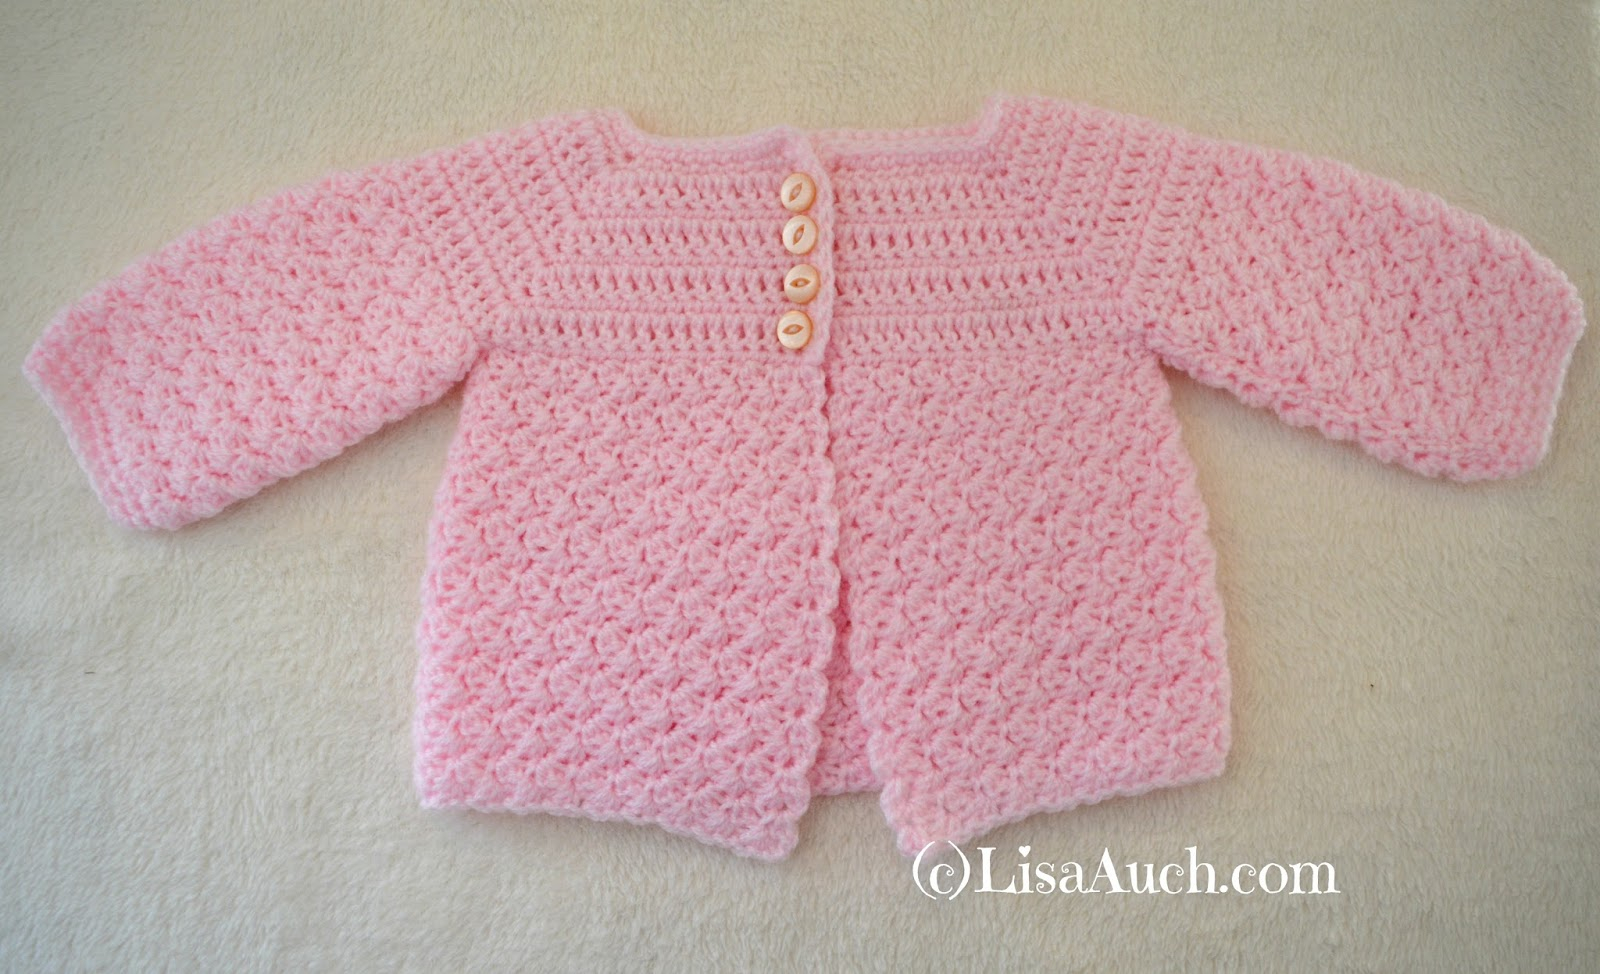 Easy Free Crochet Sweater Patterns Free Crochet Patterns And Designs Lisaauch Crochet Ba Cardigan